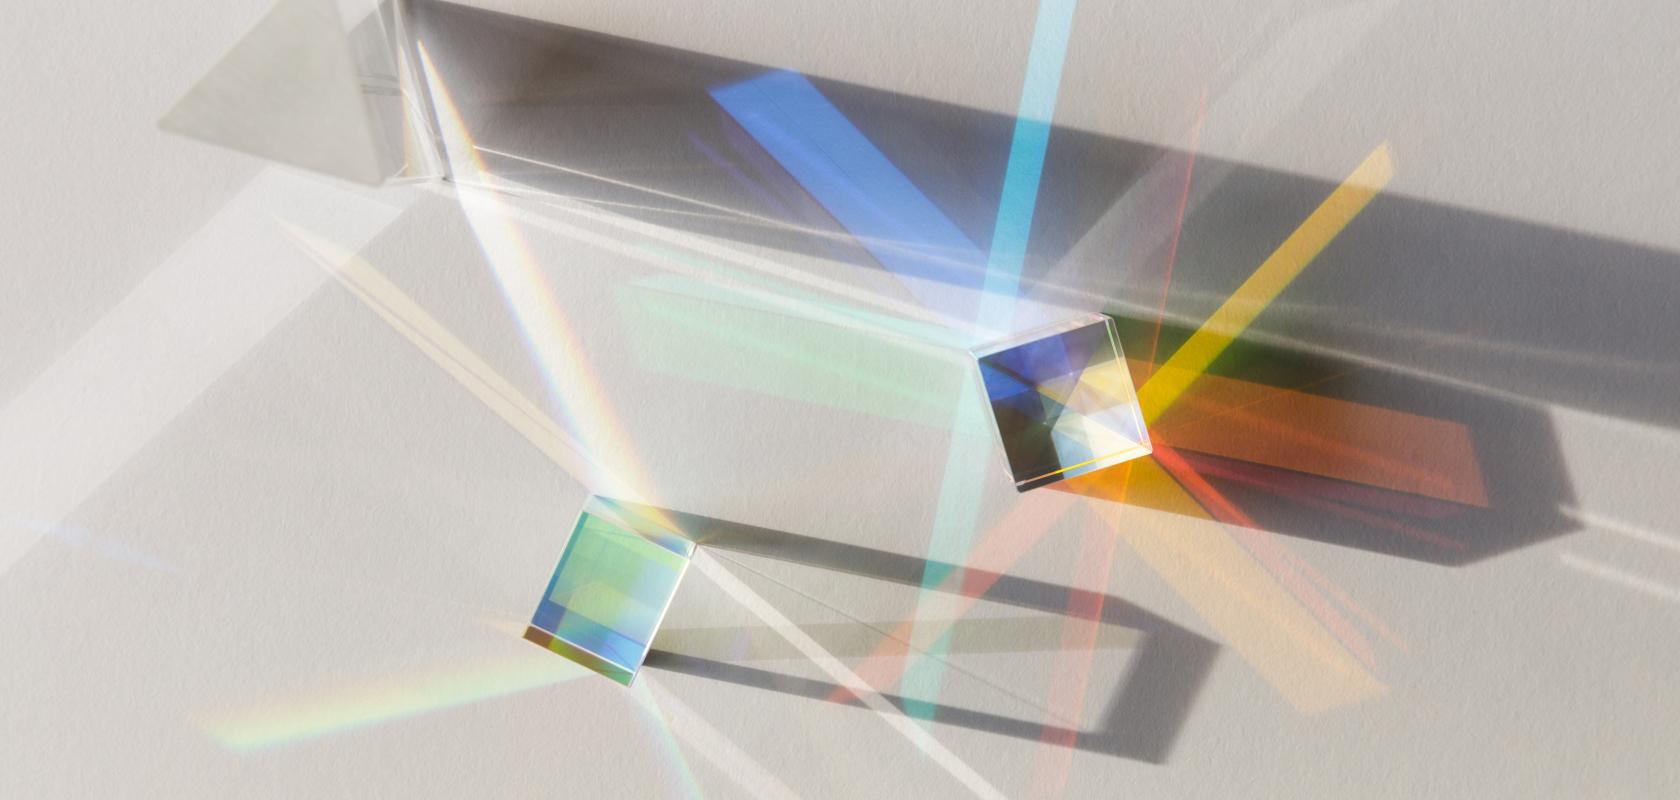 Prisms work using refraction, bending the light as it passes through a material with a different refractive index (Credit: Magic cinema/Shutterstock.com)